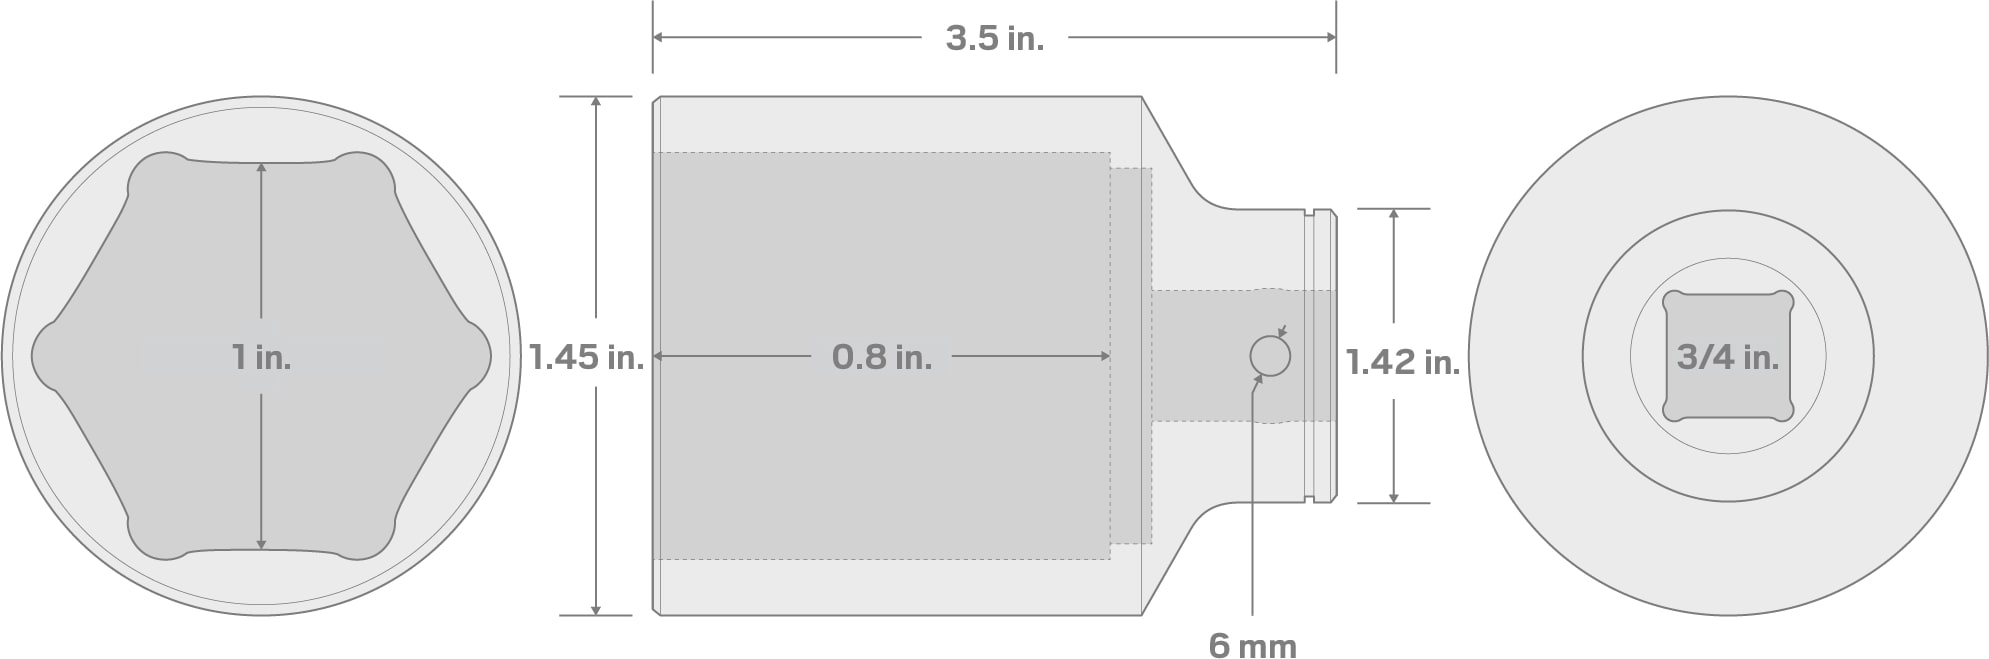 Specs for 3/4 Inch Drive x 1 Inch Deep 6-Point Socket